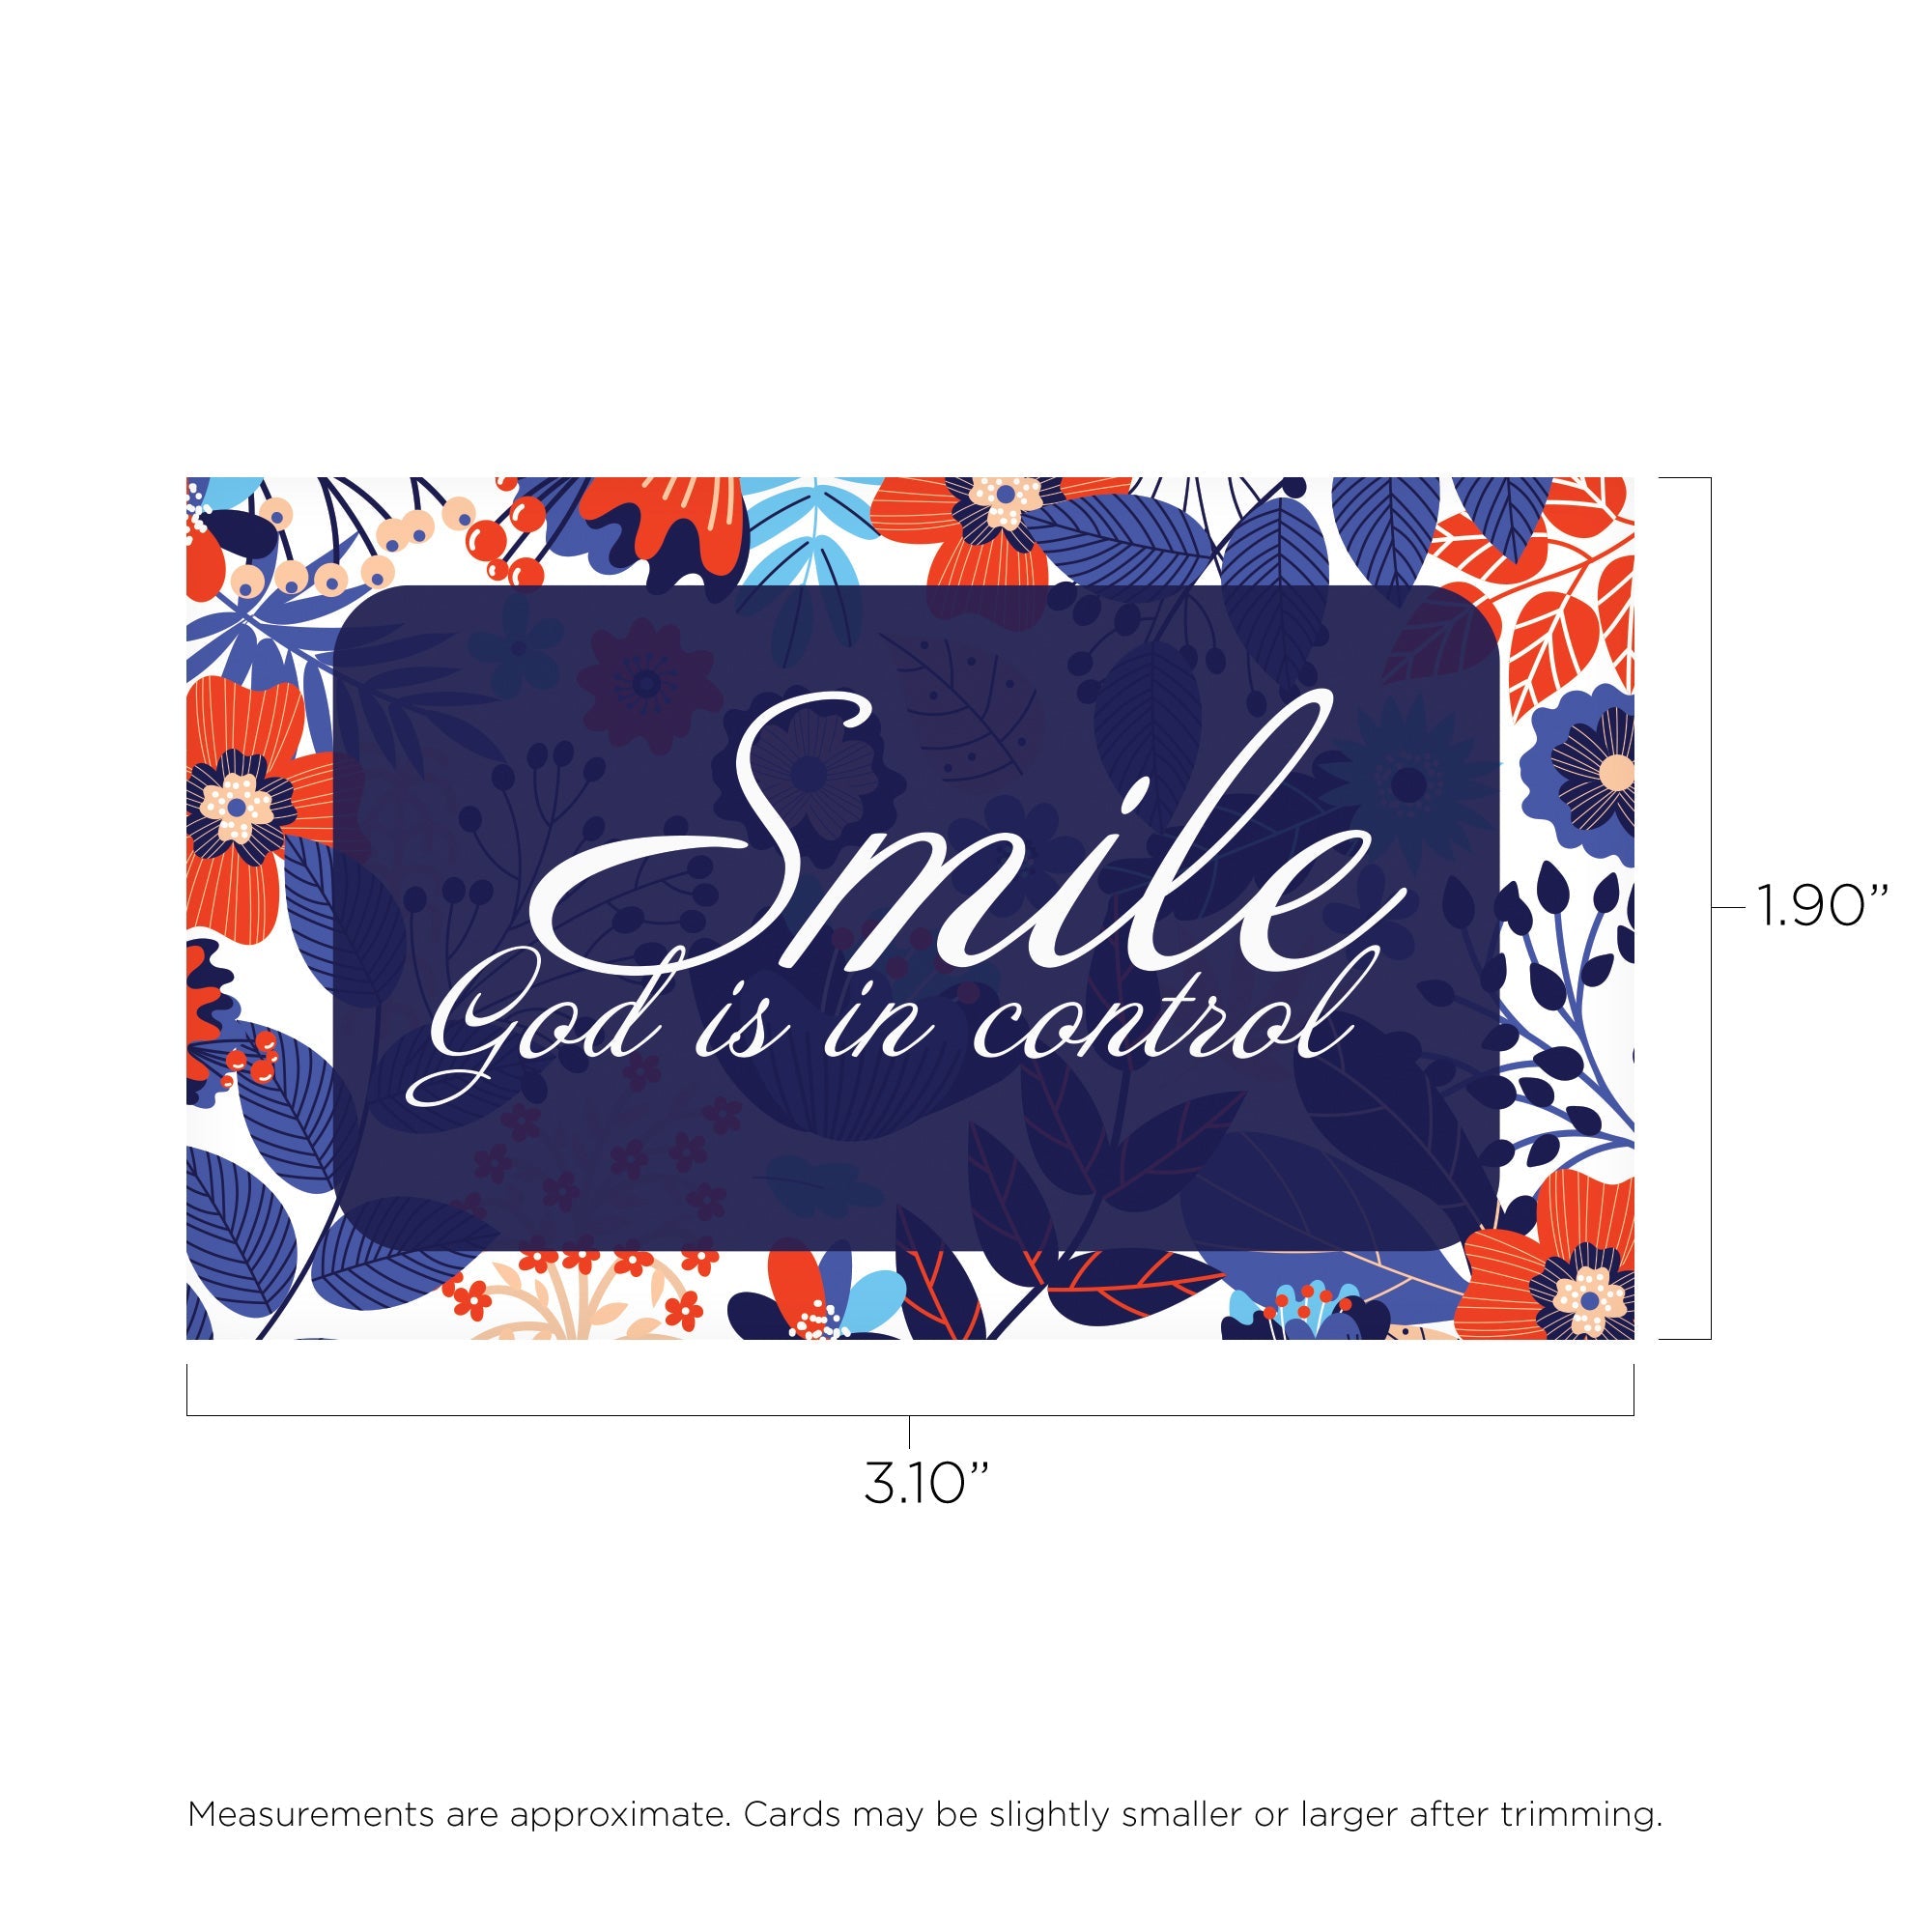 Smile. God is in control, Pass Along Scripture Cards, Pack of 25